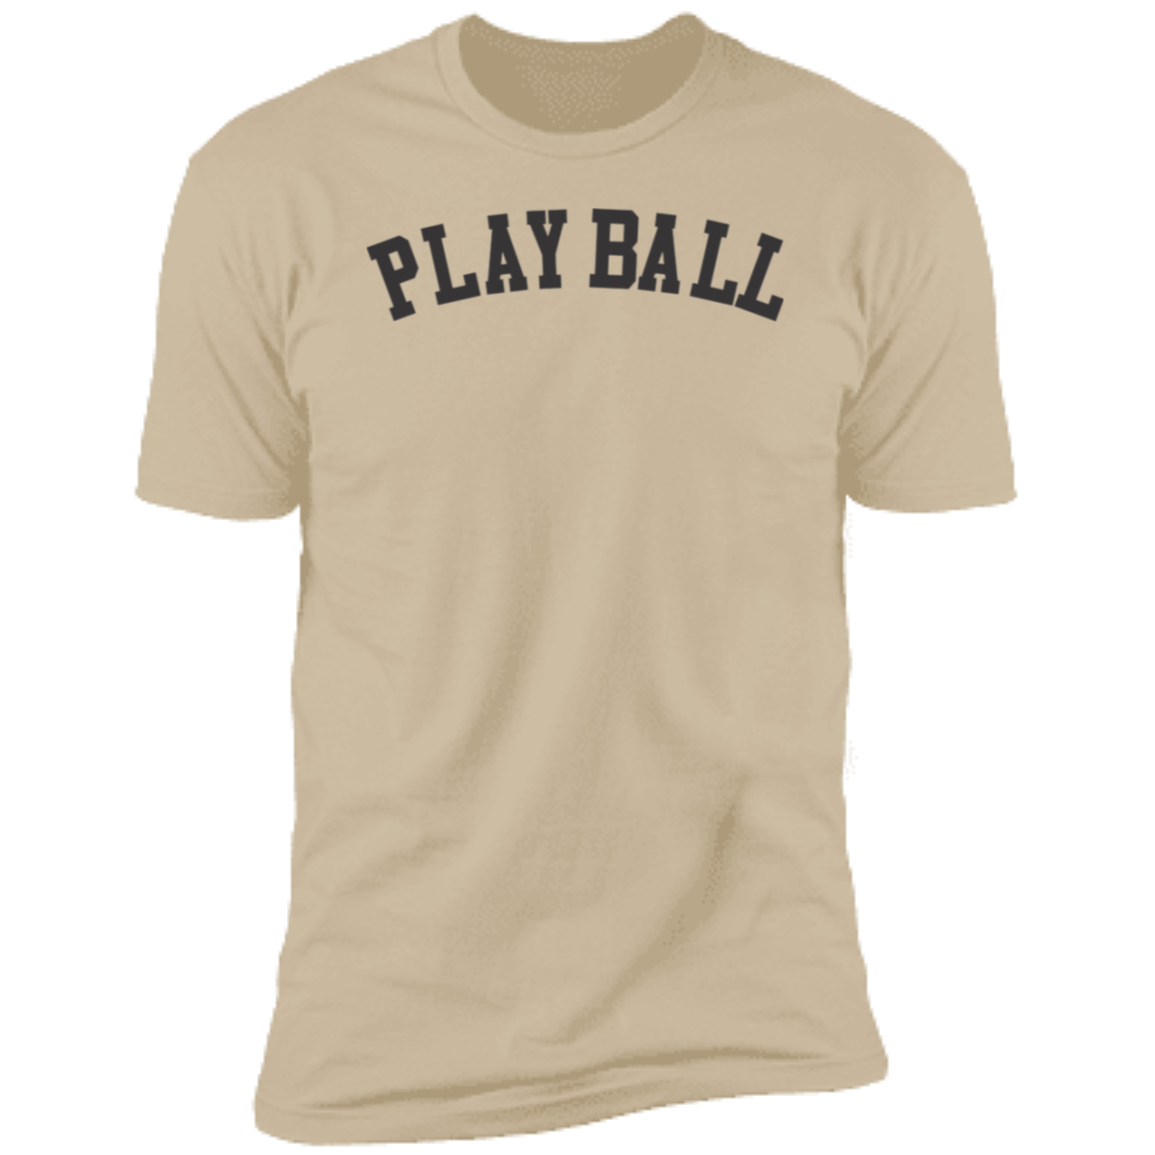 The Playball Premium Men's Tee - Game Day Getup